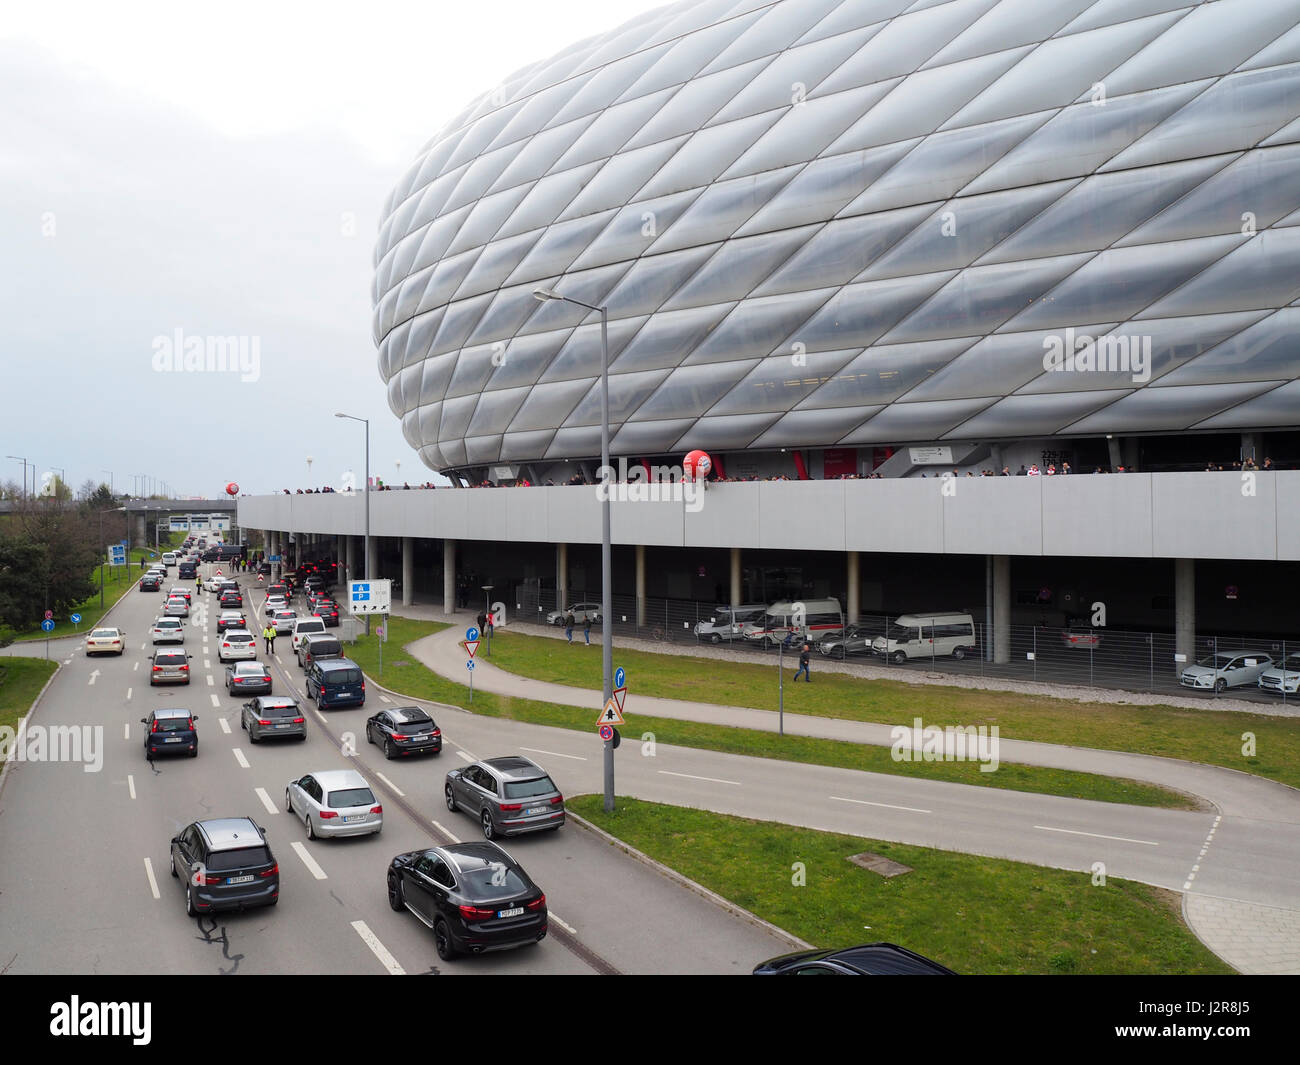 Allianz arena munich stadium hi-res stock photography and images - Alamy